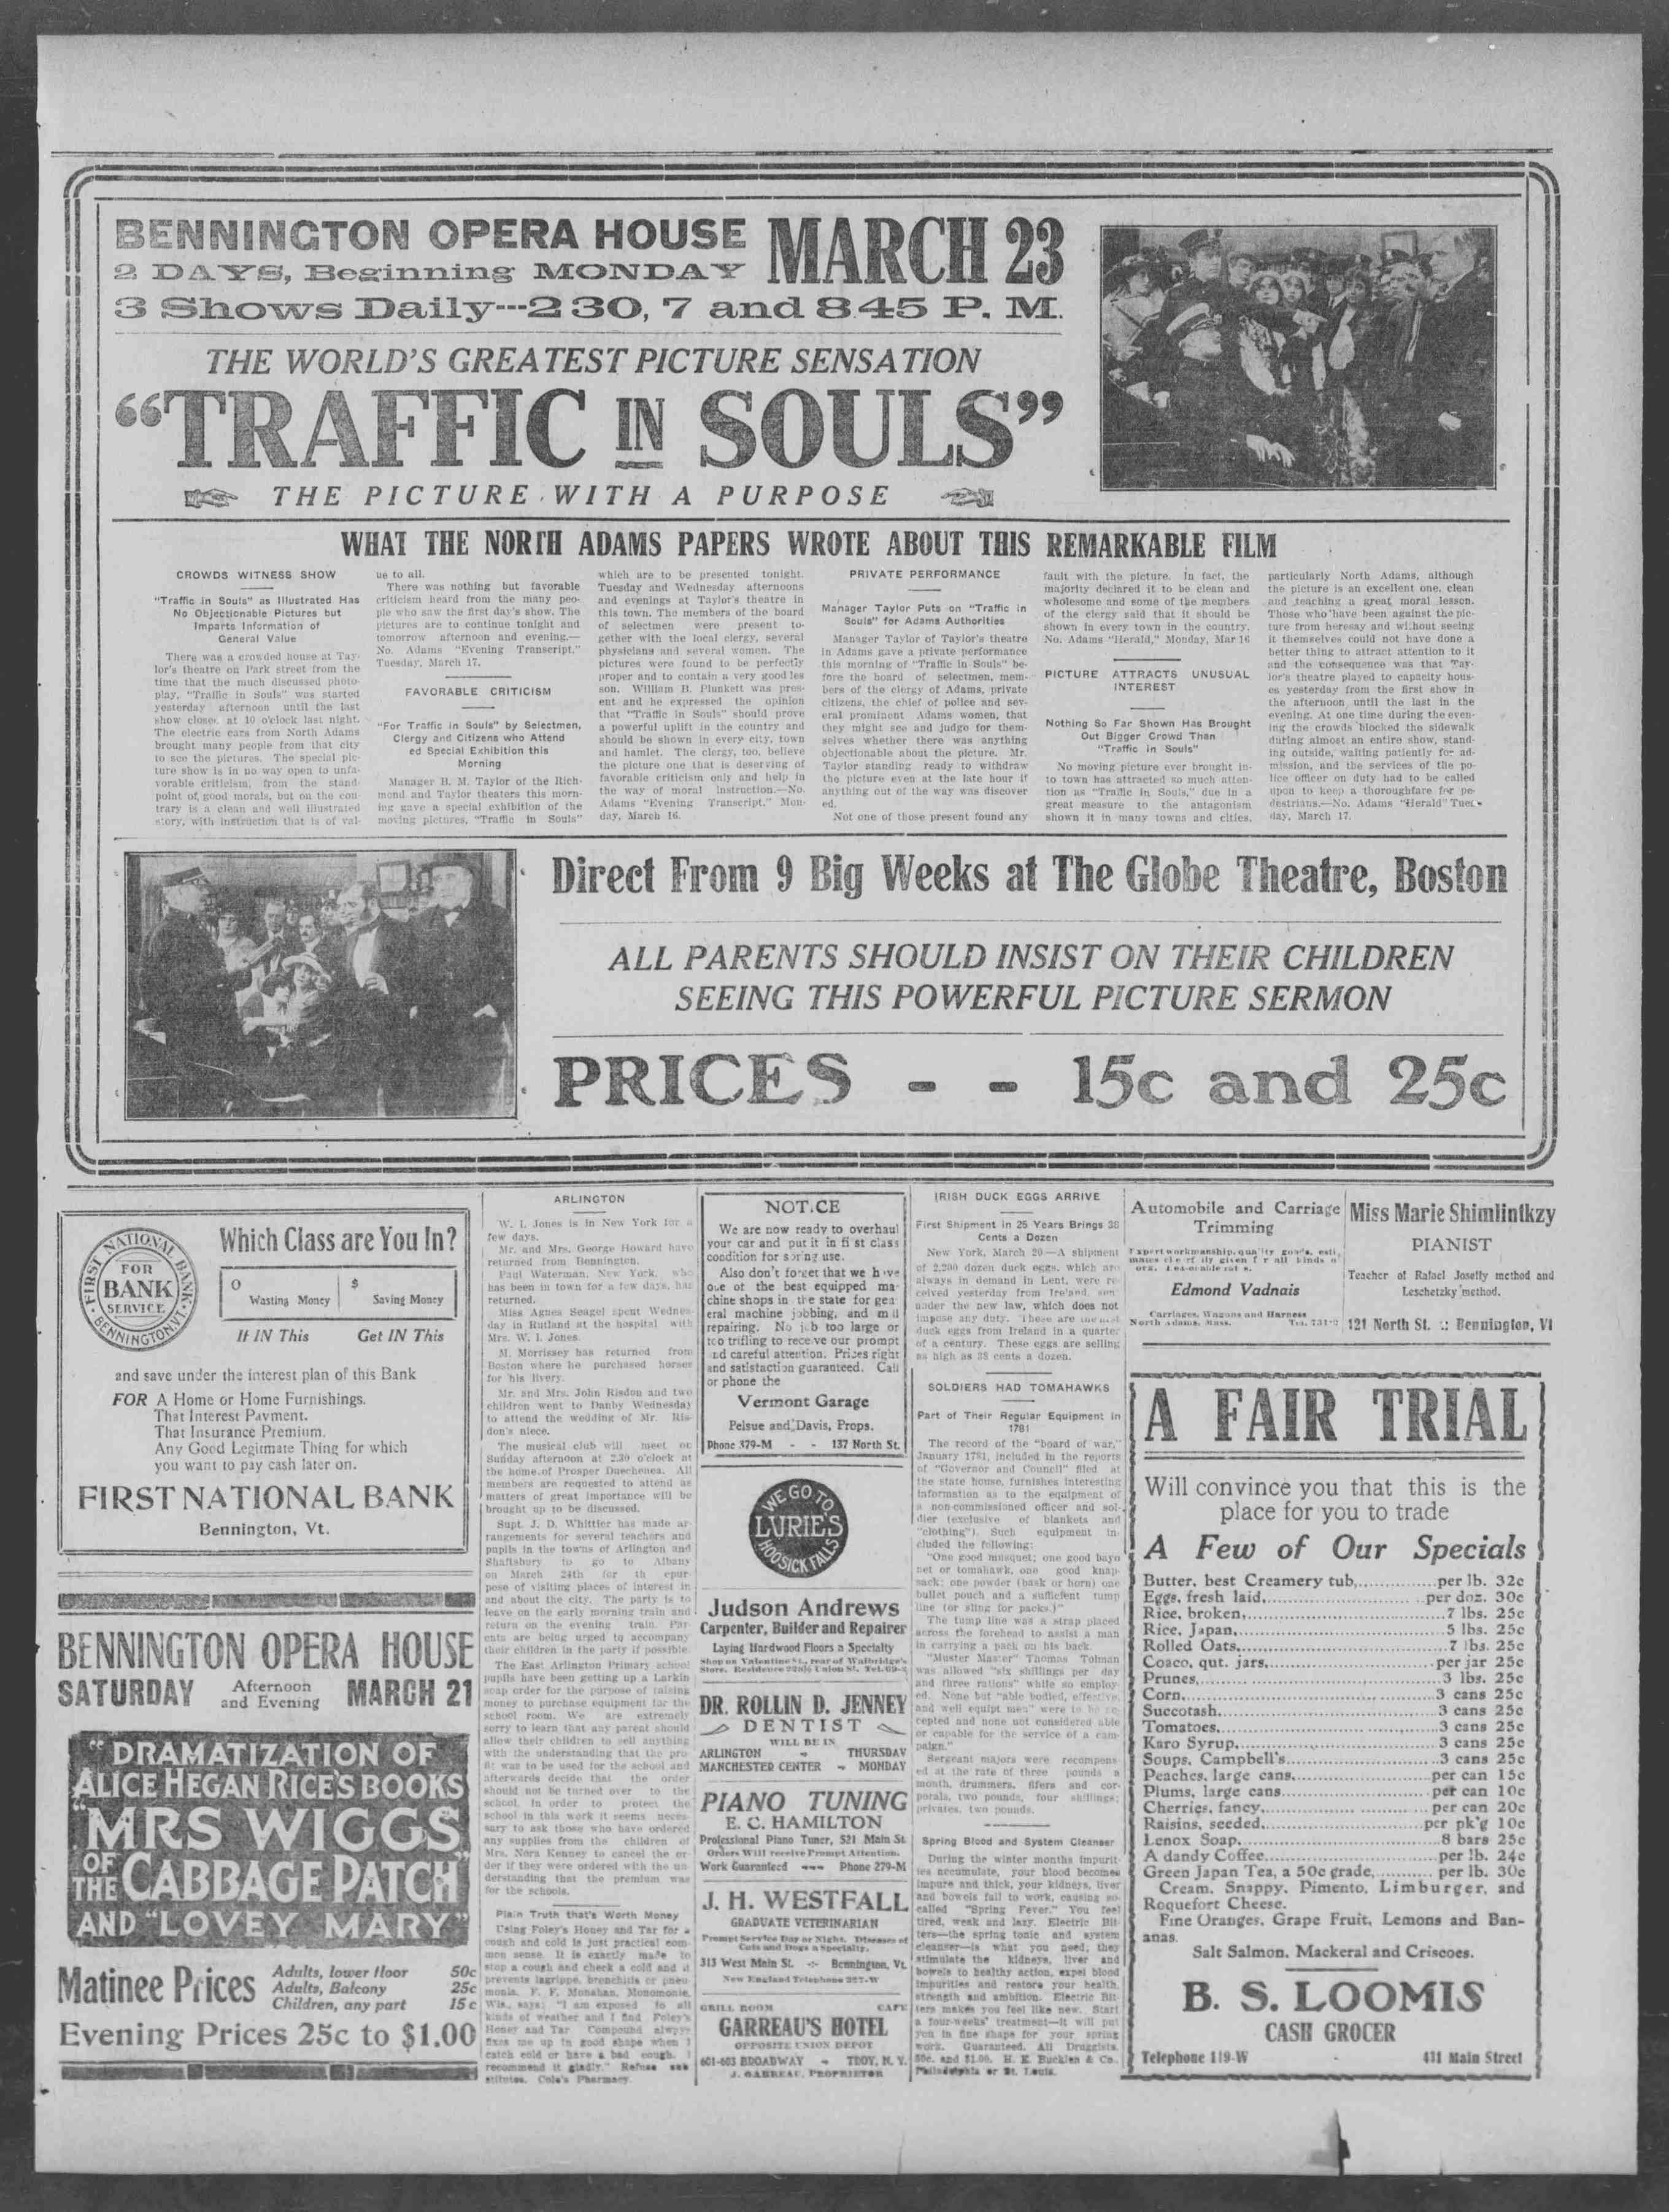 This advertisement for the screening of “Traffic in Souls” appeared in a Bennington, Vt., newspaper.